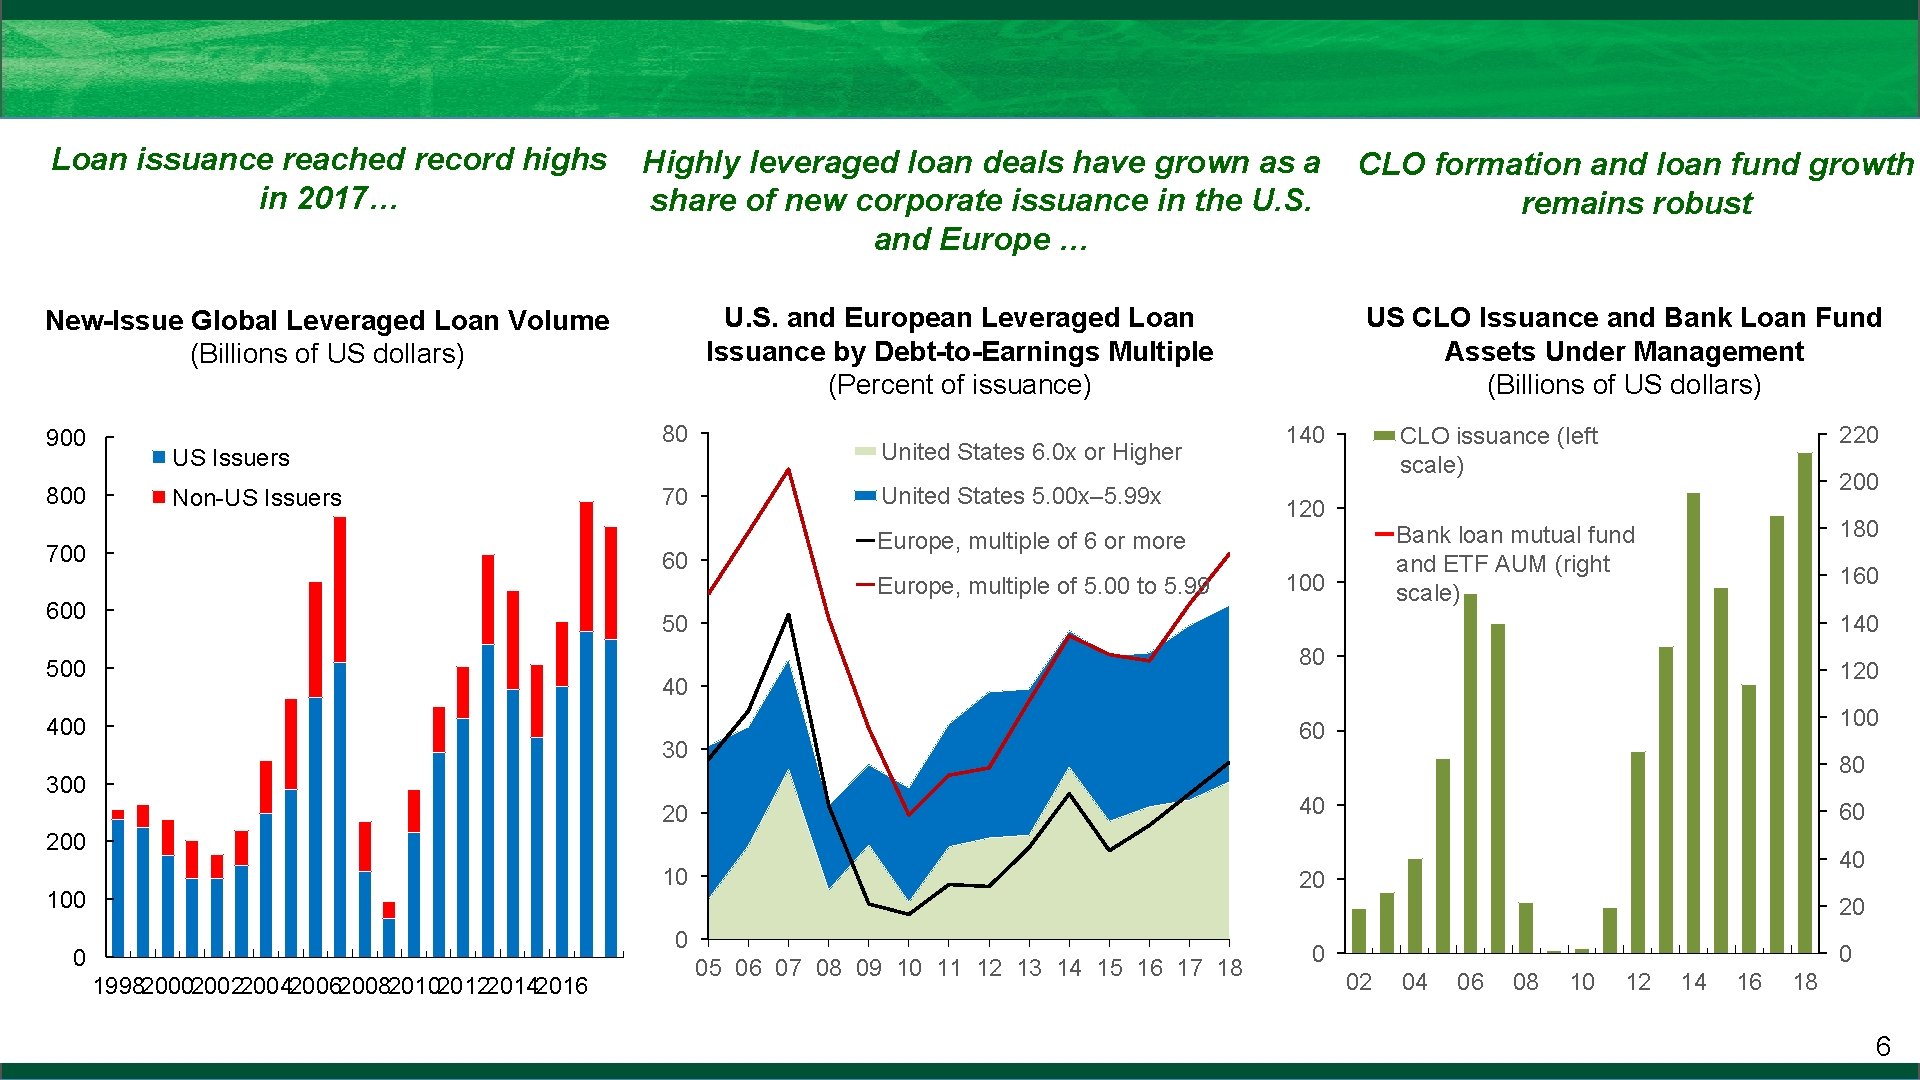 Loan issuance reached record highs in 2017… Highly leveraged loan deals have grown as